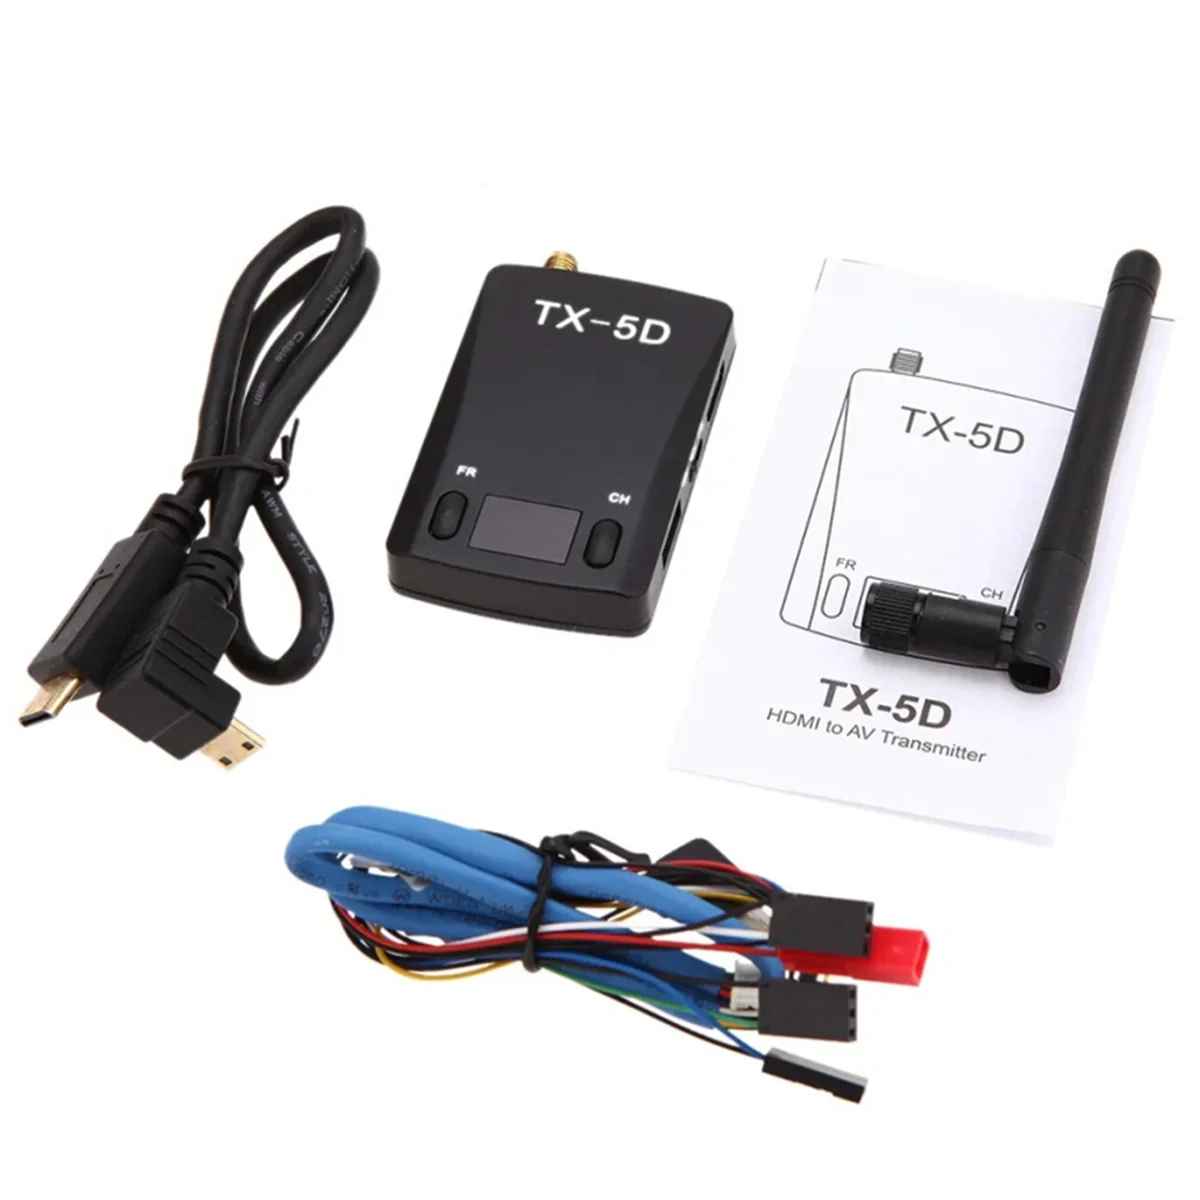 tx-5d-58g-600mw-32ch-7-24v-hdmi-compatible-and-cvbs-to-audio-video-transmitter-module-for-gopro-hero-3-3-4